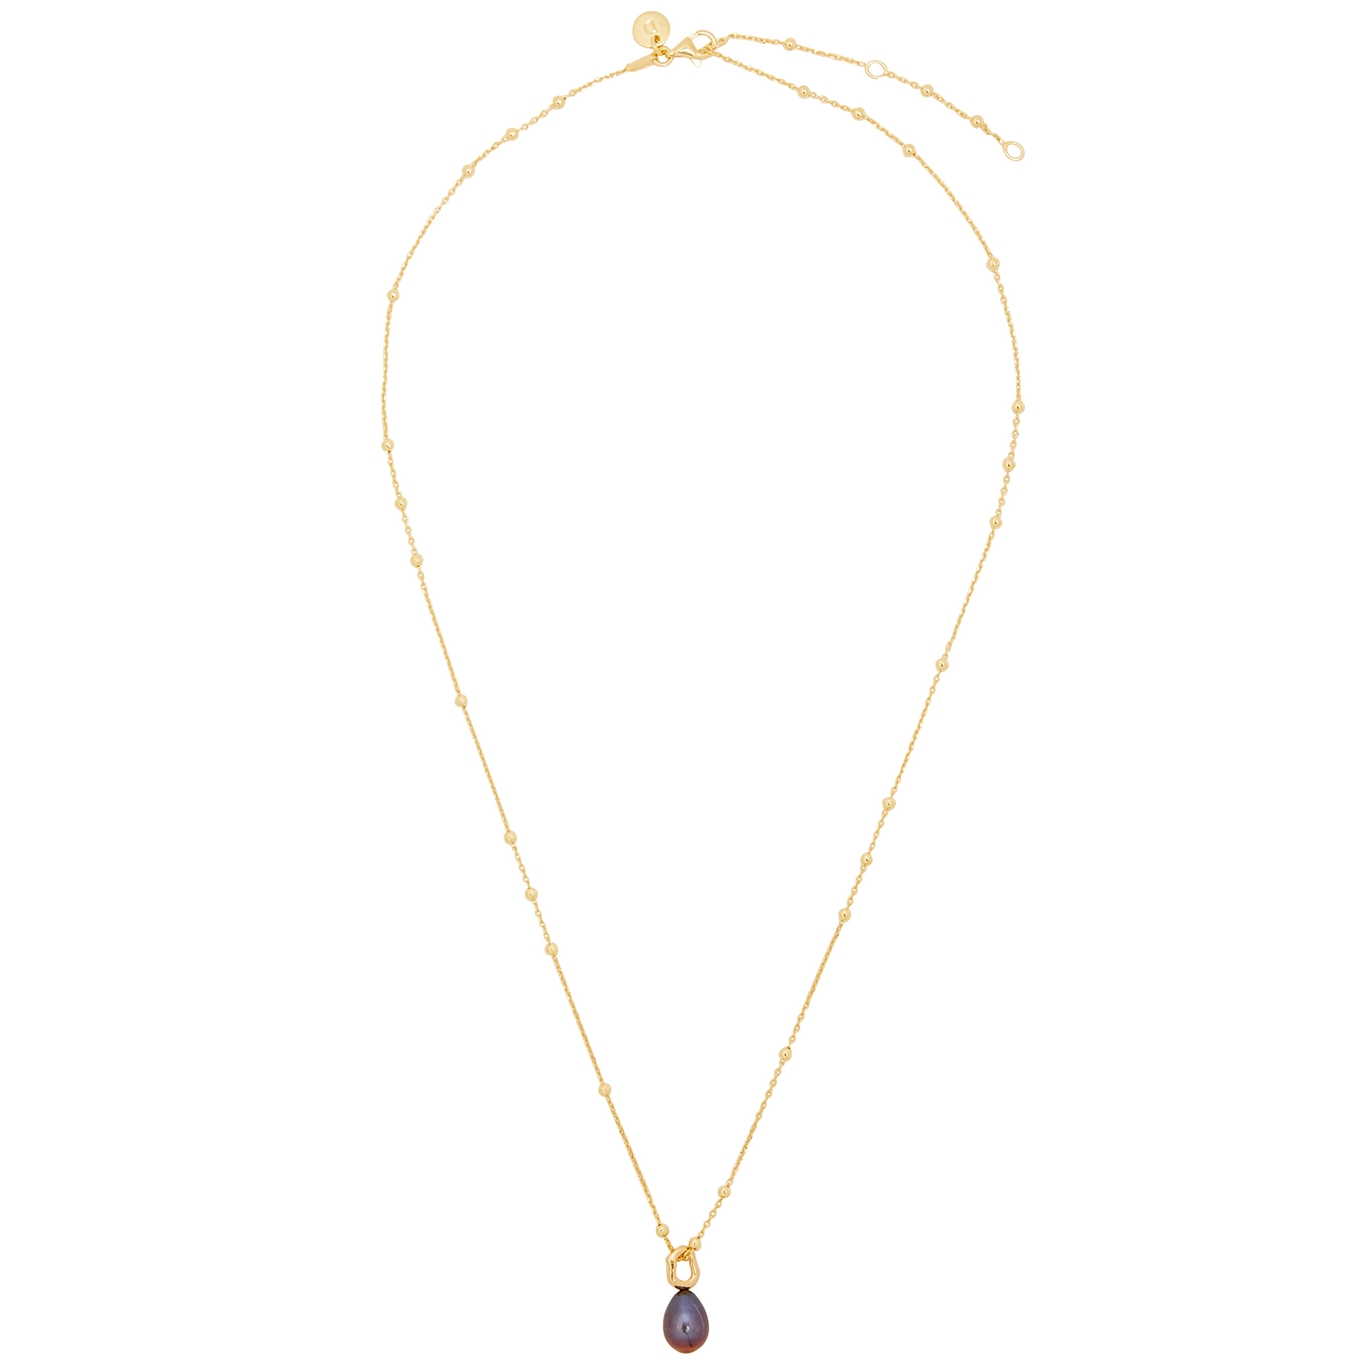 Daisy London Treasures Black Pearl 18kt Gold-plated Necklace